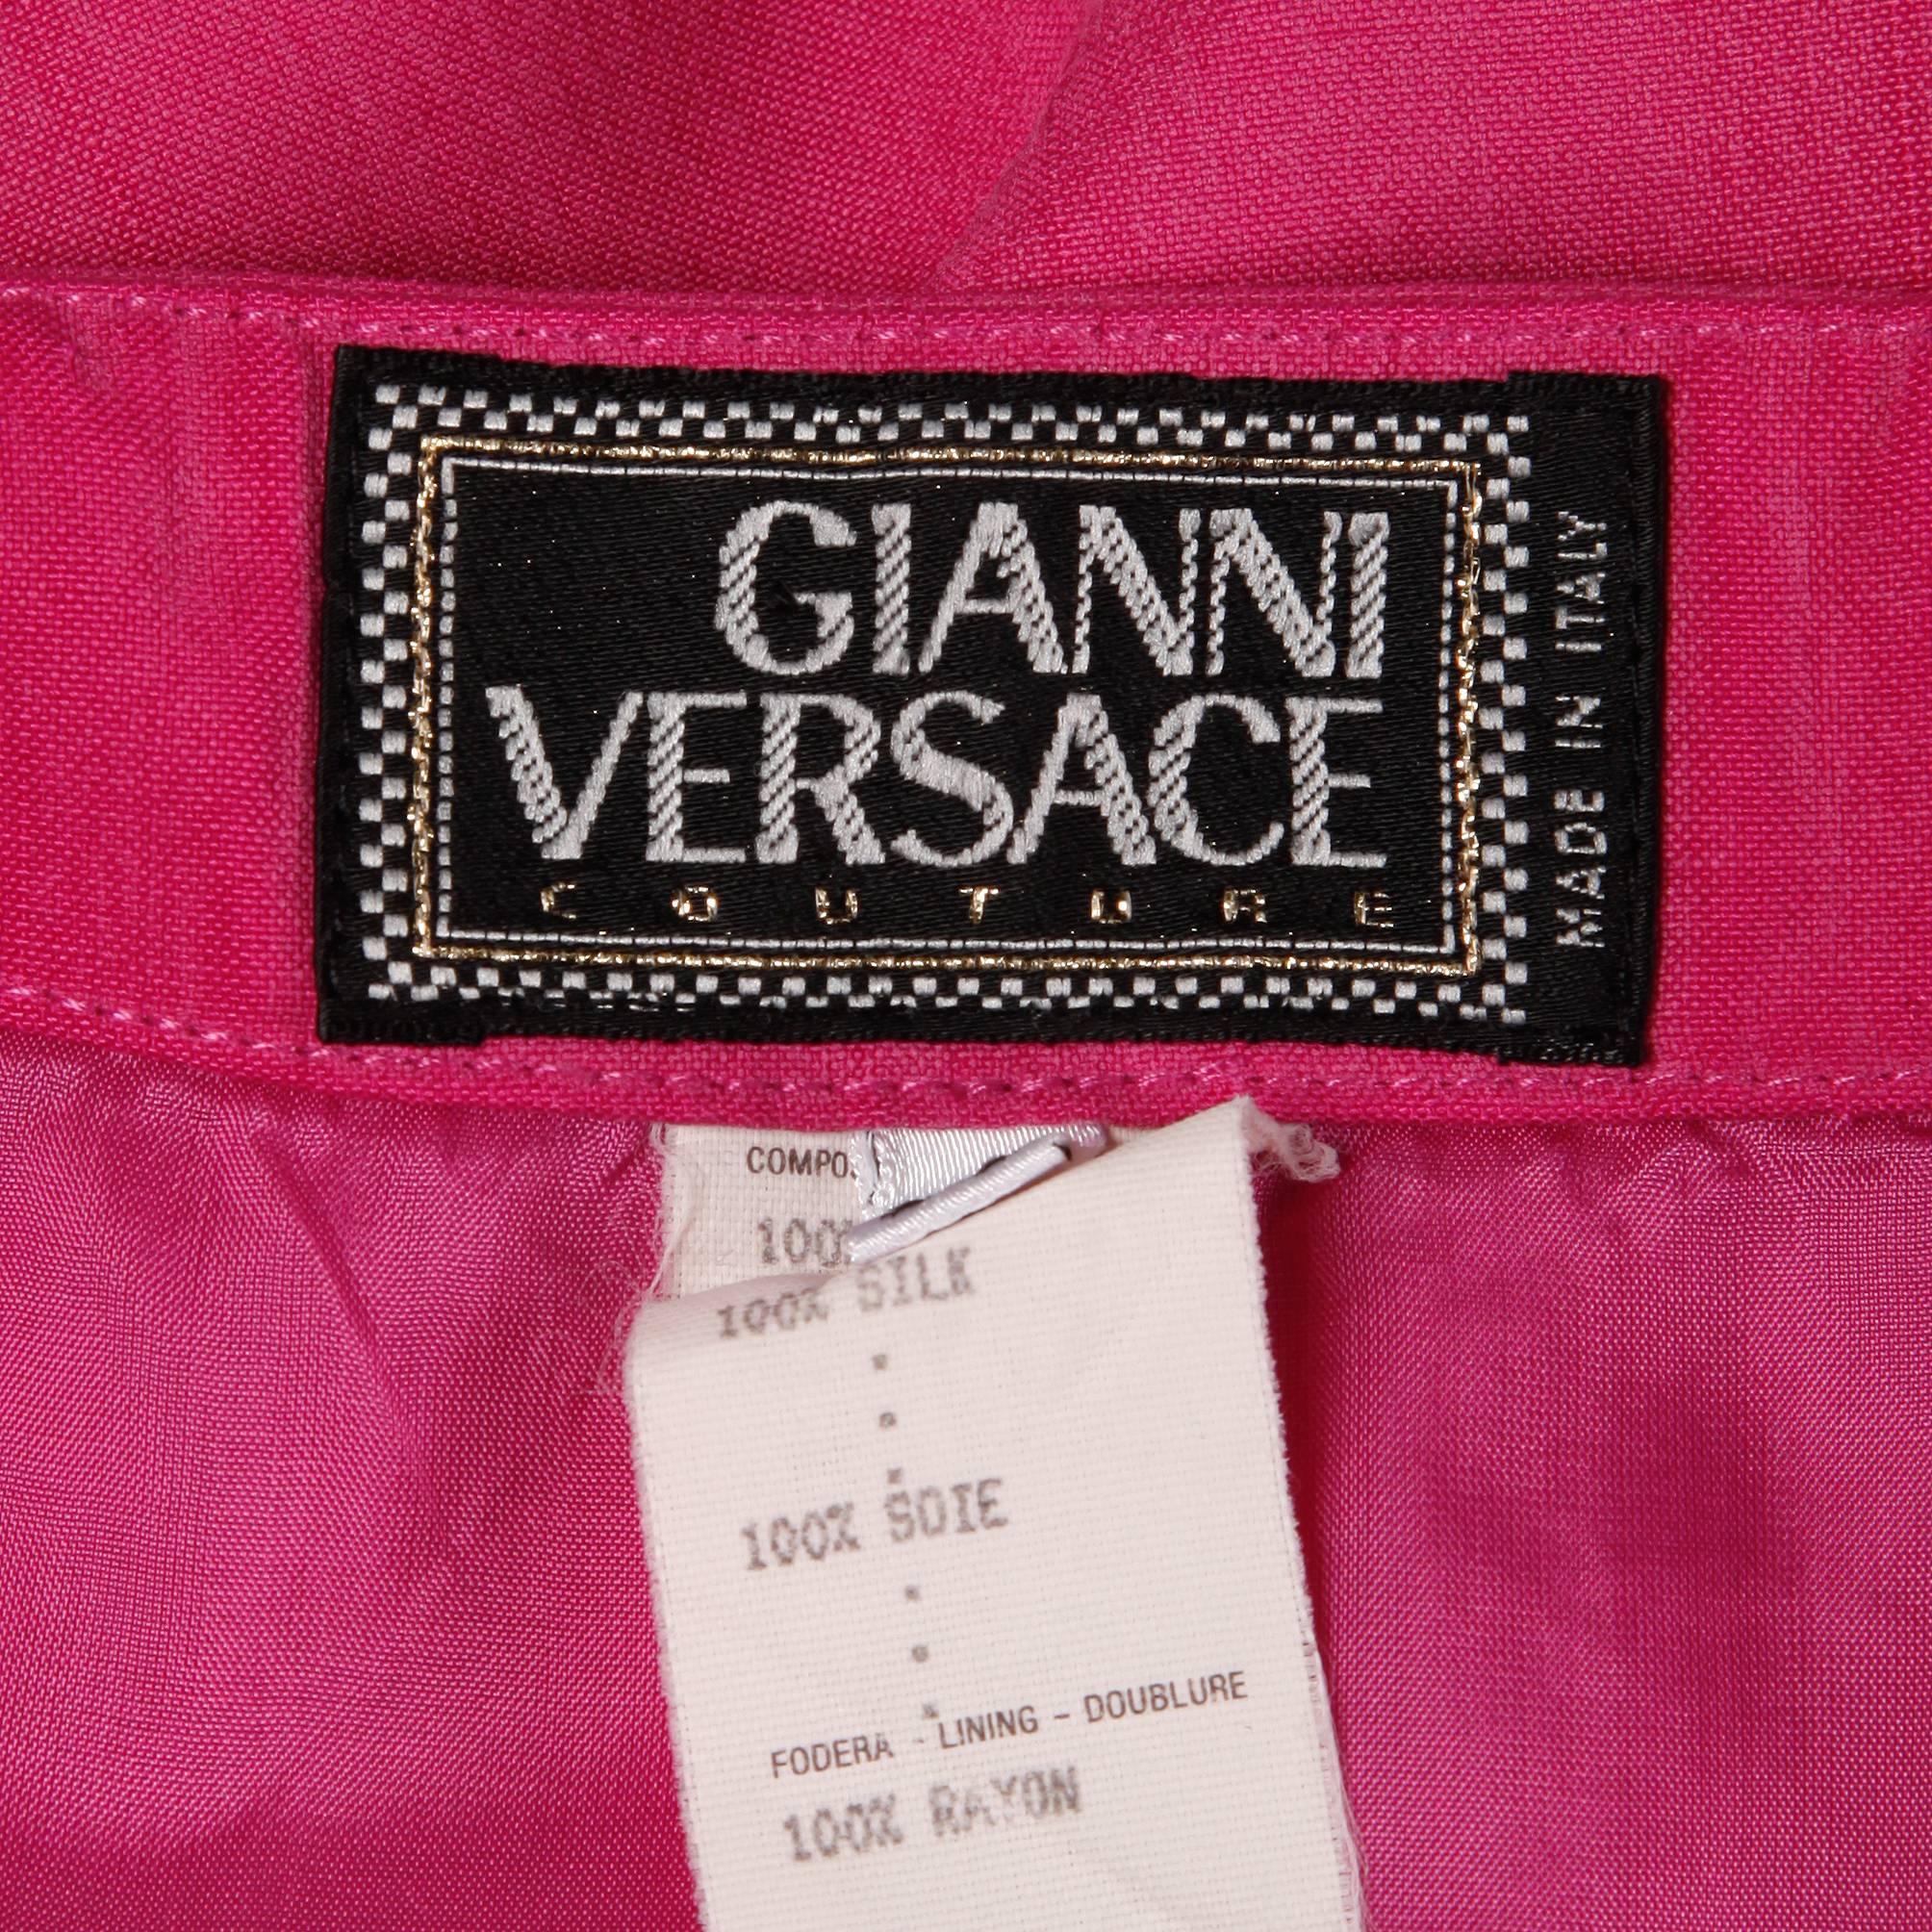 Bright pink silk skirt with iconic medusa buttons by Gianni Versace.

Details: 

Fully Lined
Button Front Closure
Marked Size: 4
Estimated Size: XS-S
Color: Bright Pink
Fabric: 100% Silk
Label: Gianni Versace Couture

Measurements: 

Waist: